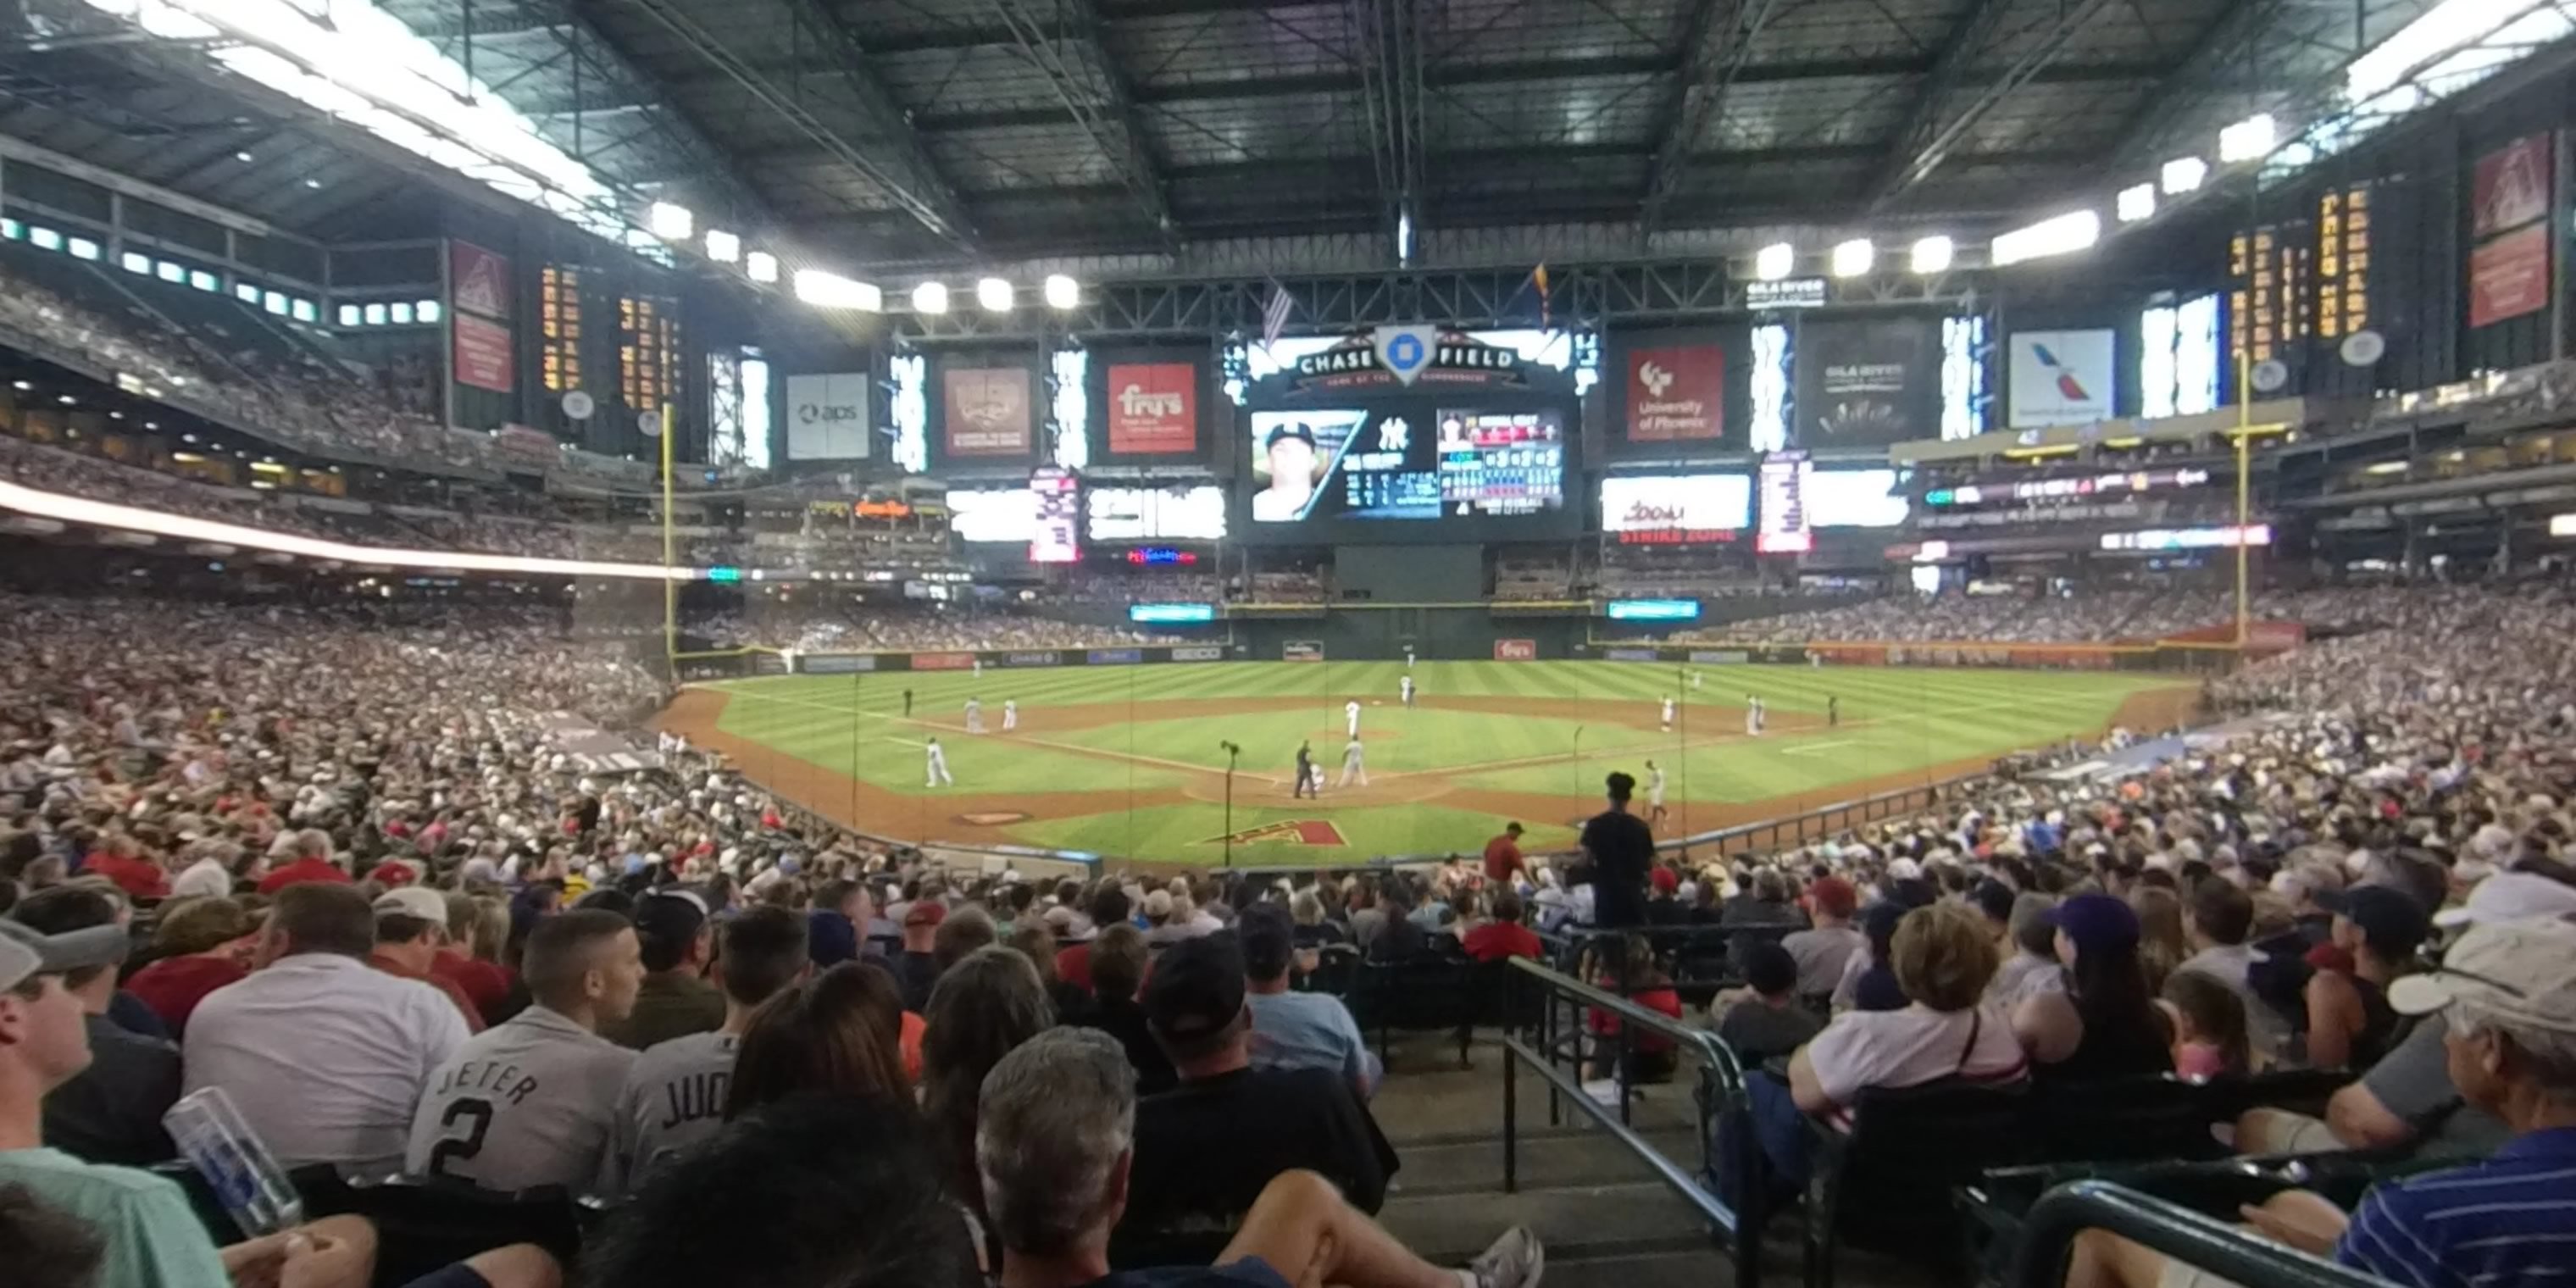 section 121 panoramic seat view  for baseball - chase field